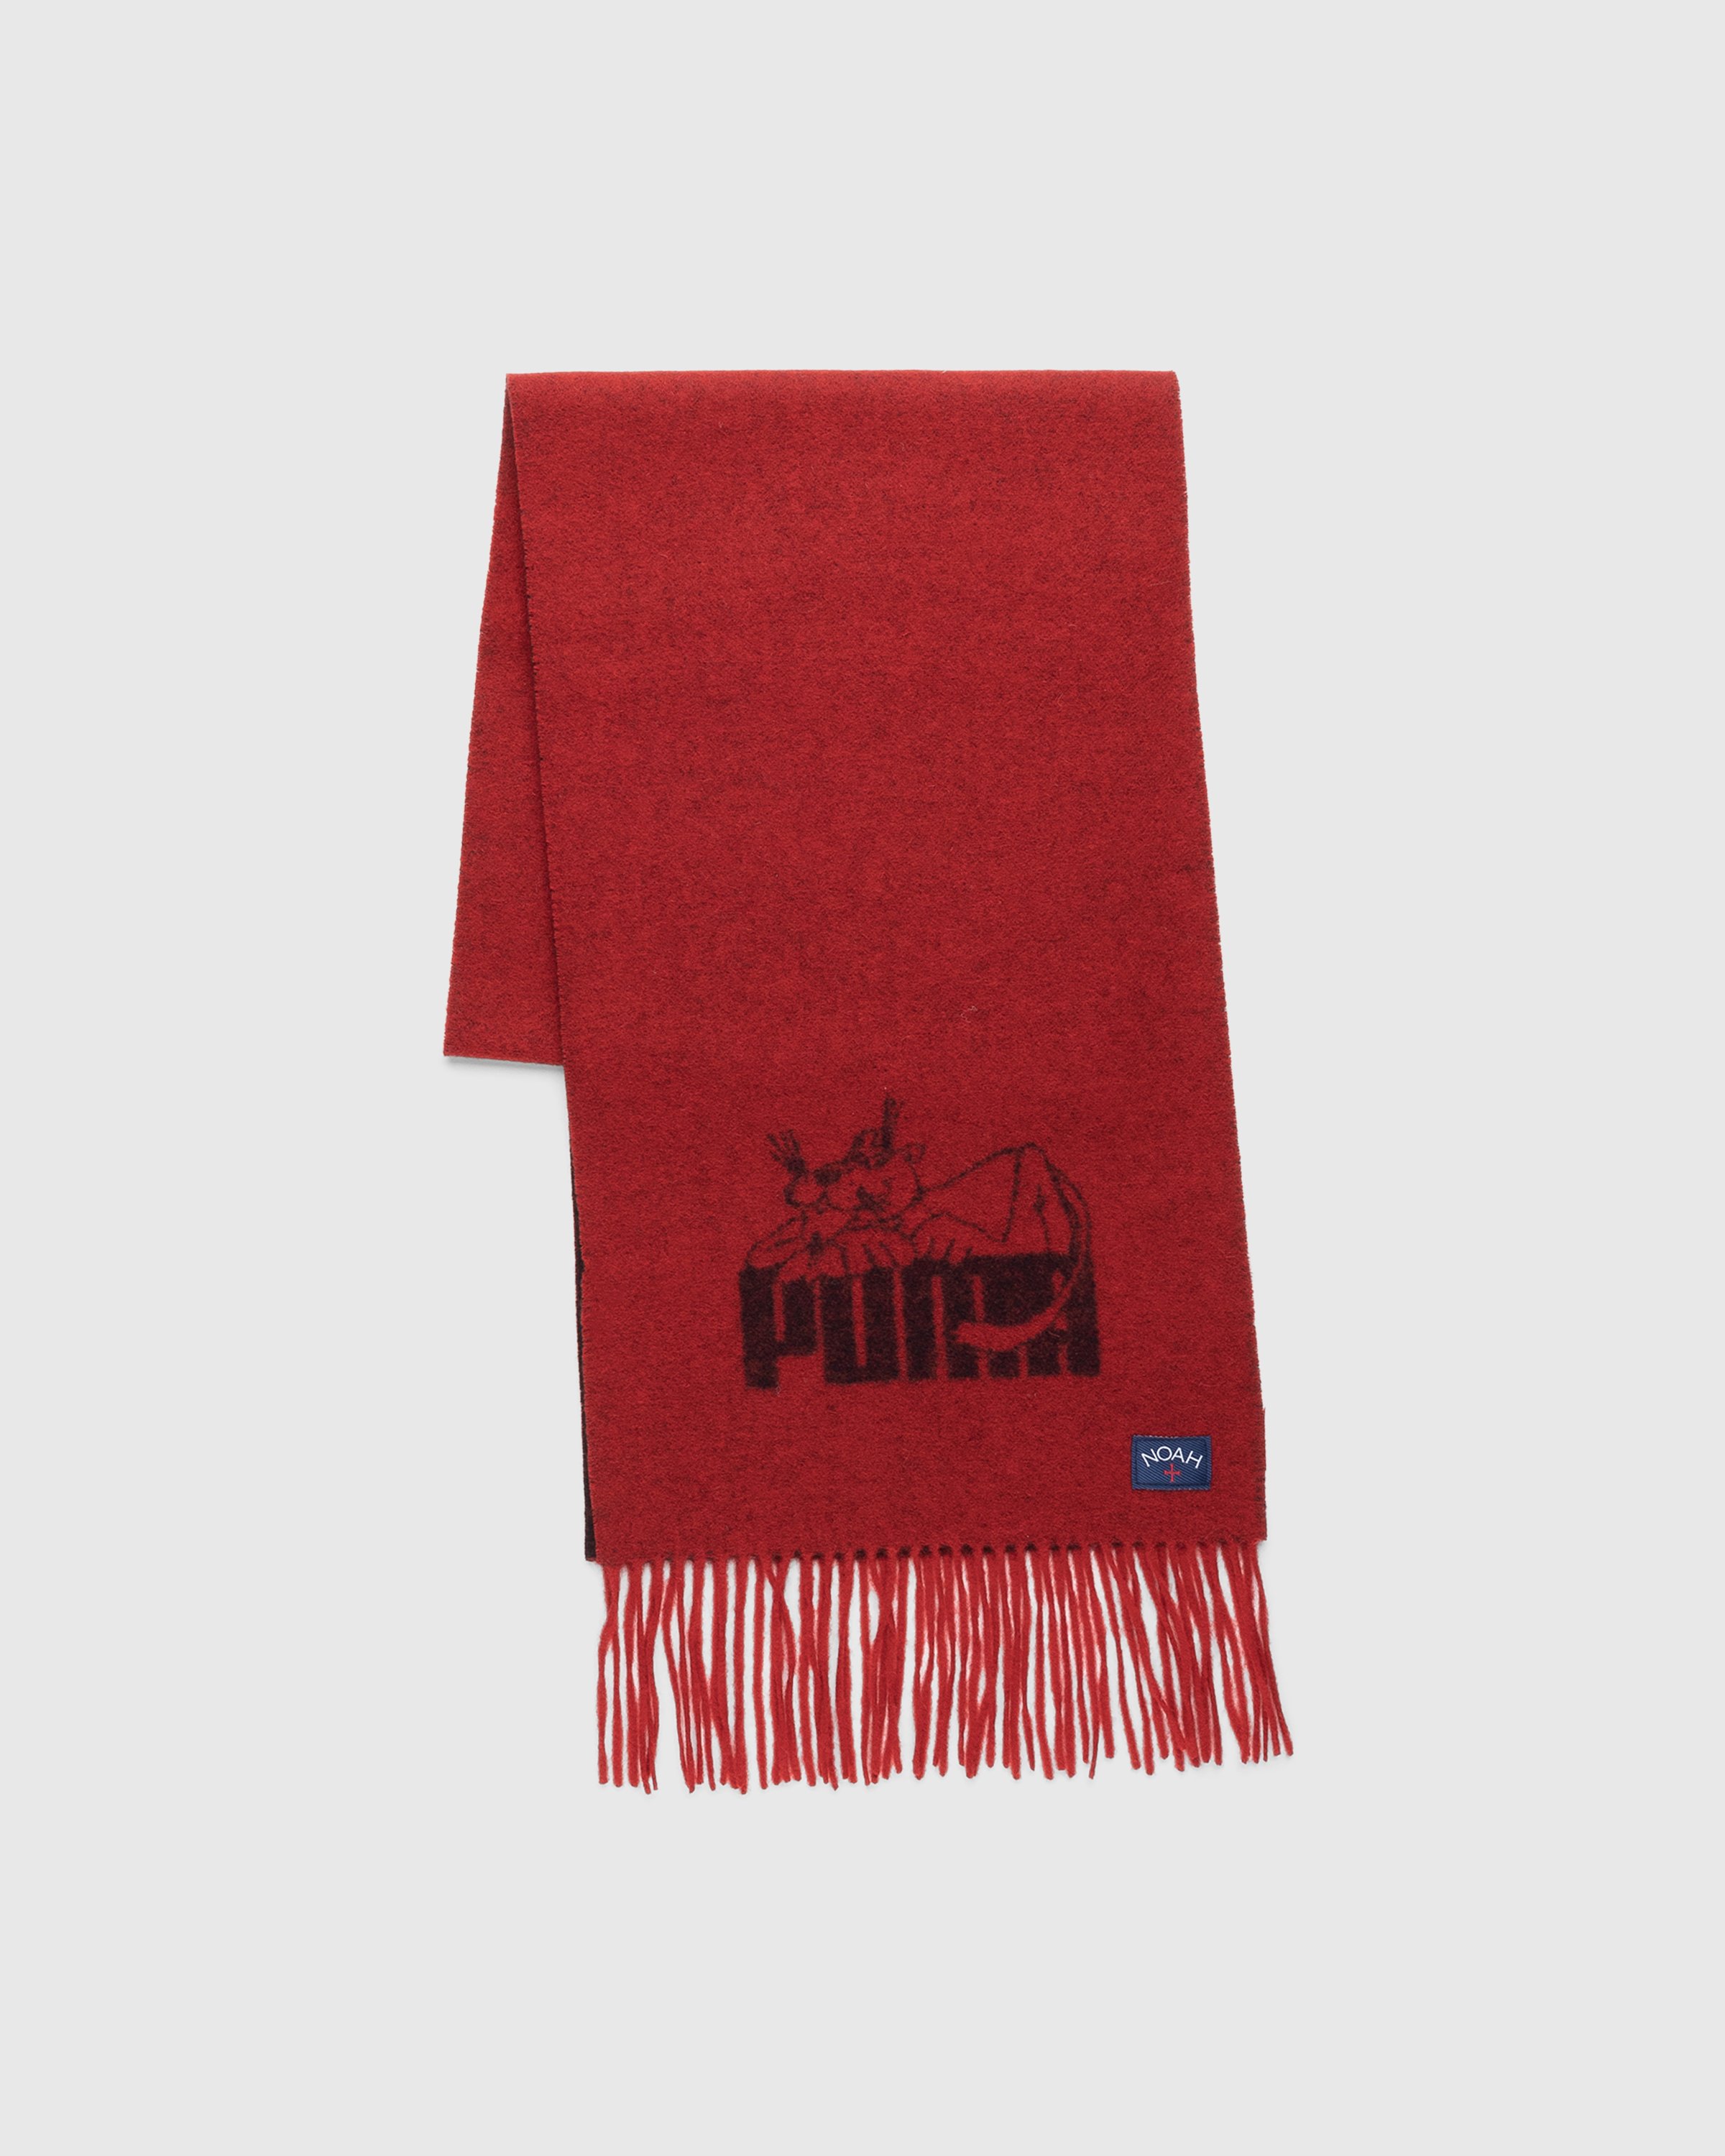 Puma x Noah - Wool Scarf Red - Accessories - Red - Image 2